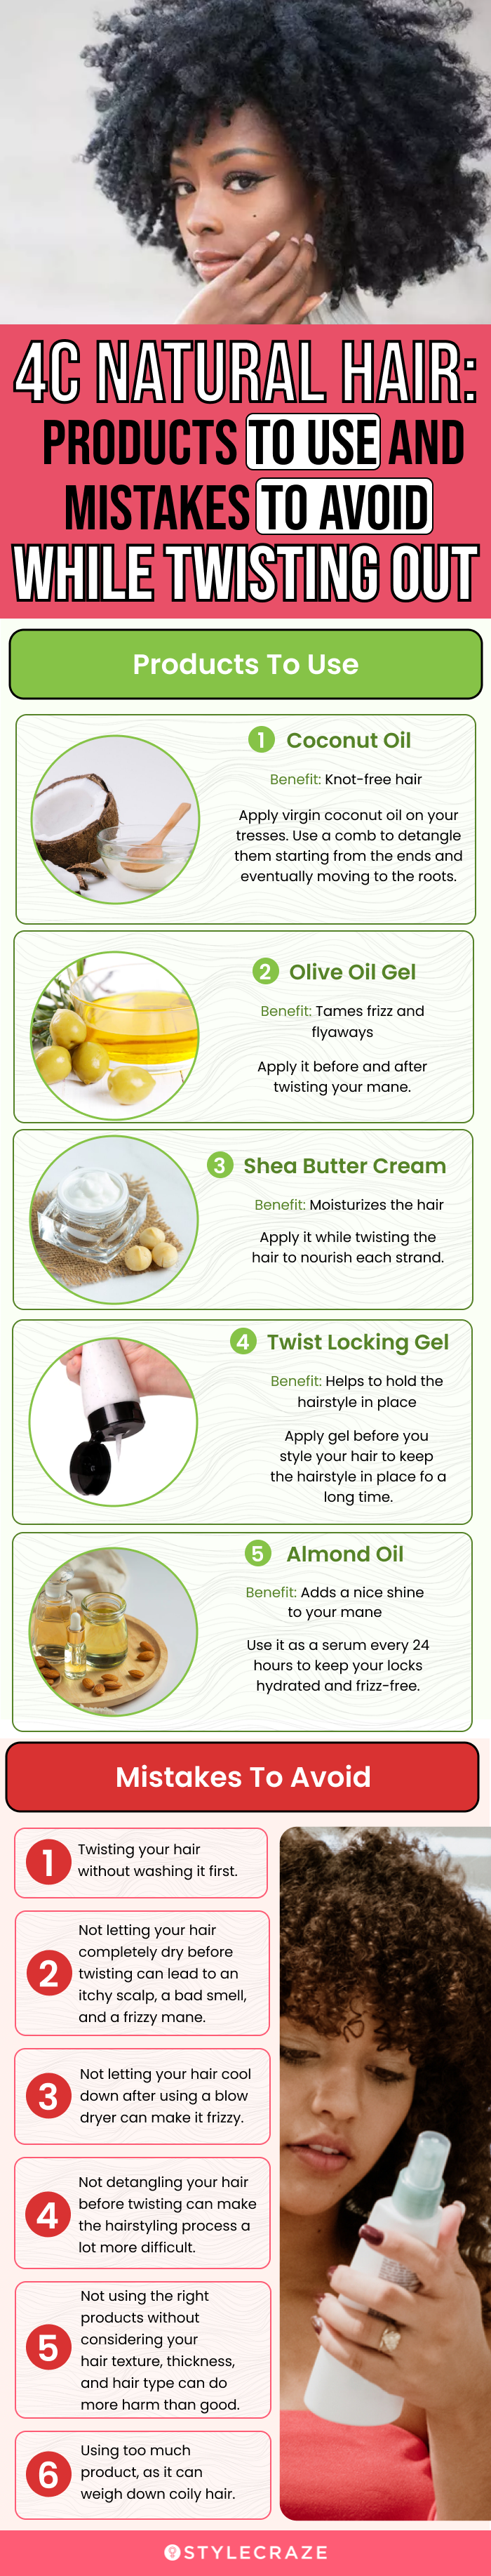 4c natural hair products to use and mistakes to avoid while twisting out (infographic)